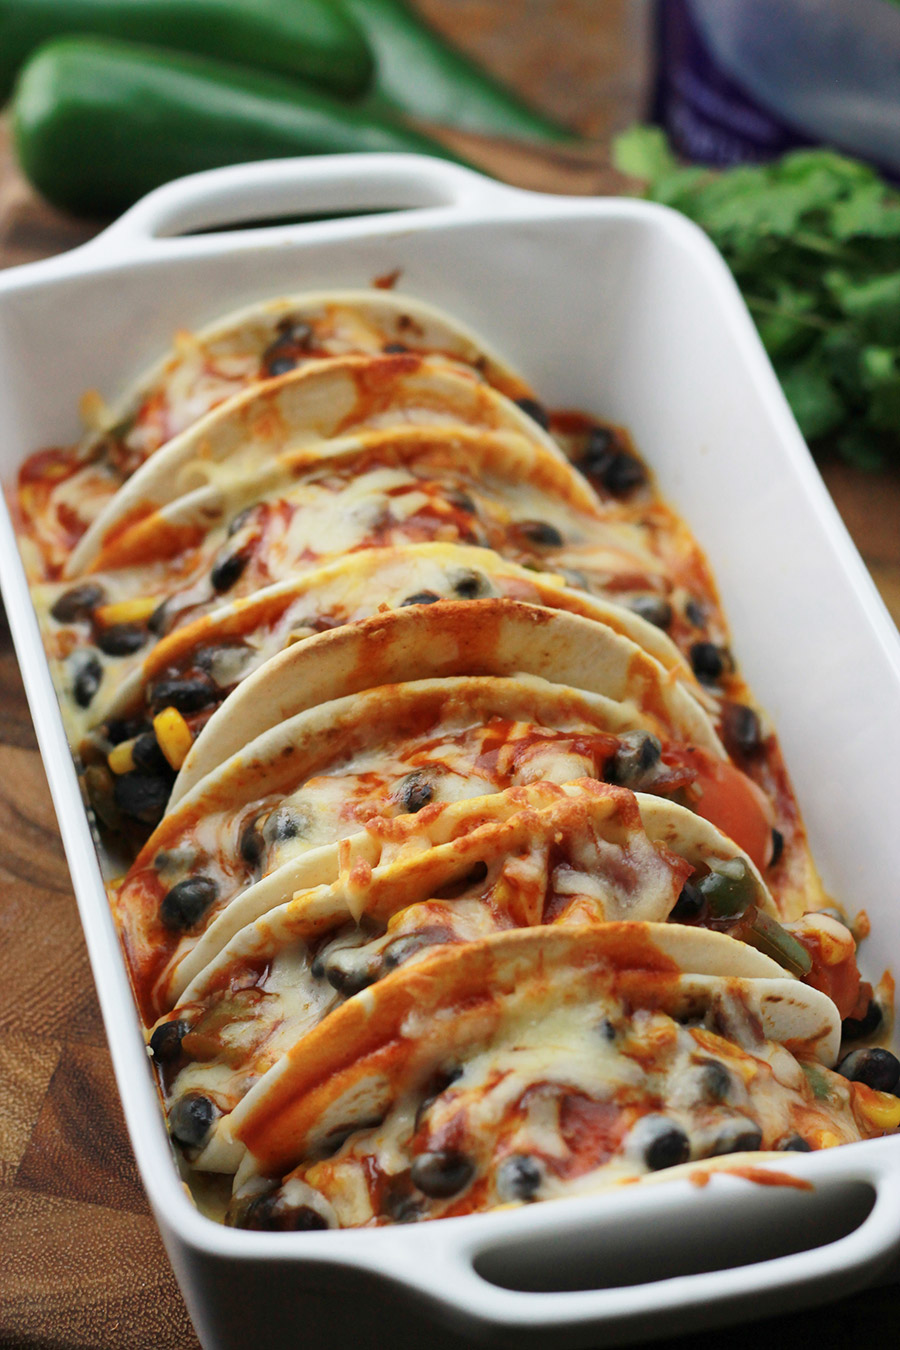  Baked Black Bean Tacos with Red Chile Sauce in baking dish.